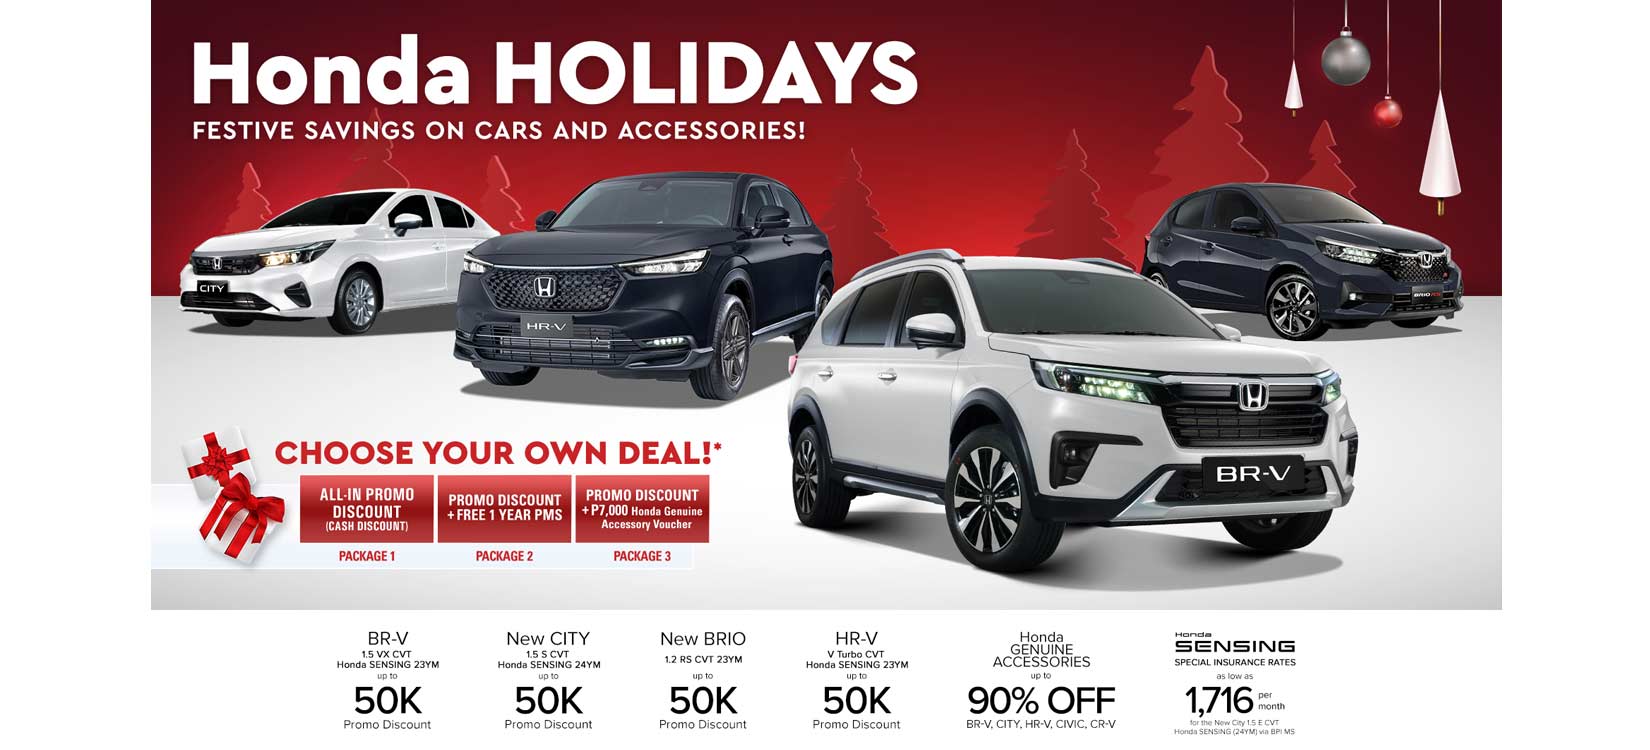 Honda Cars PH spreads holiday joys with exciting deals this season